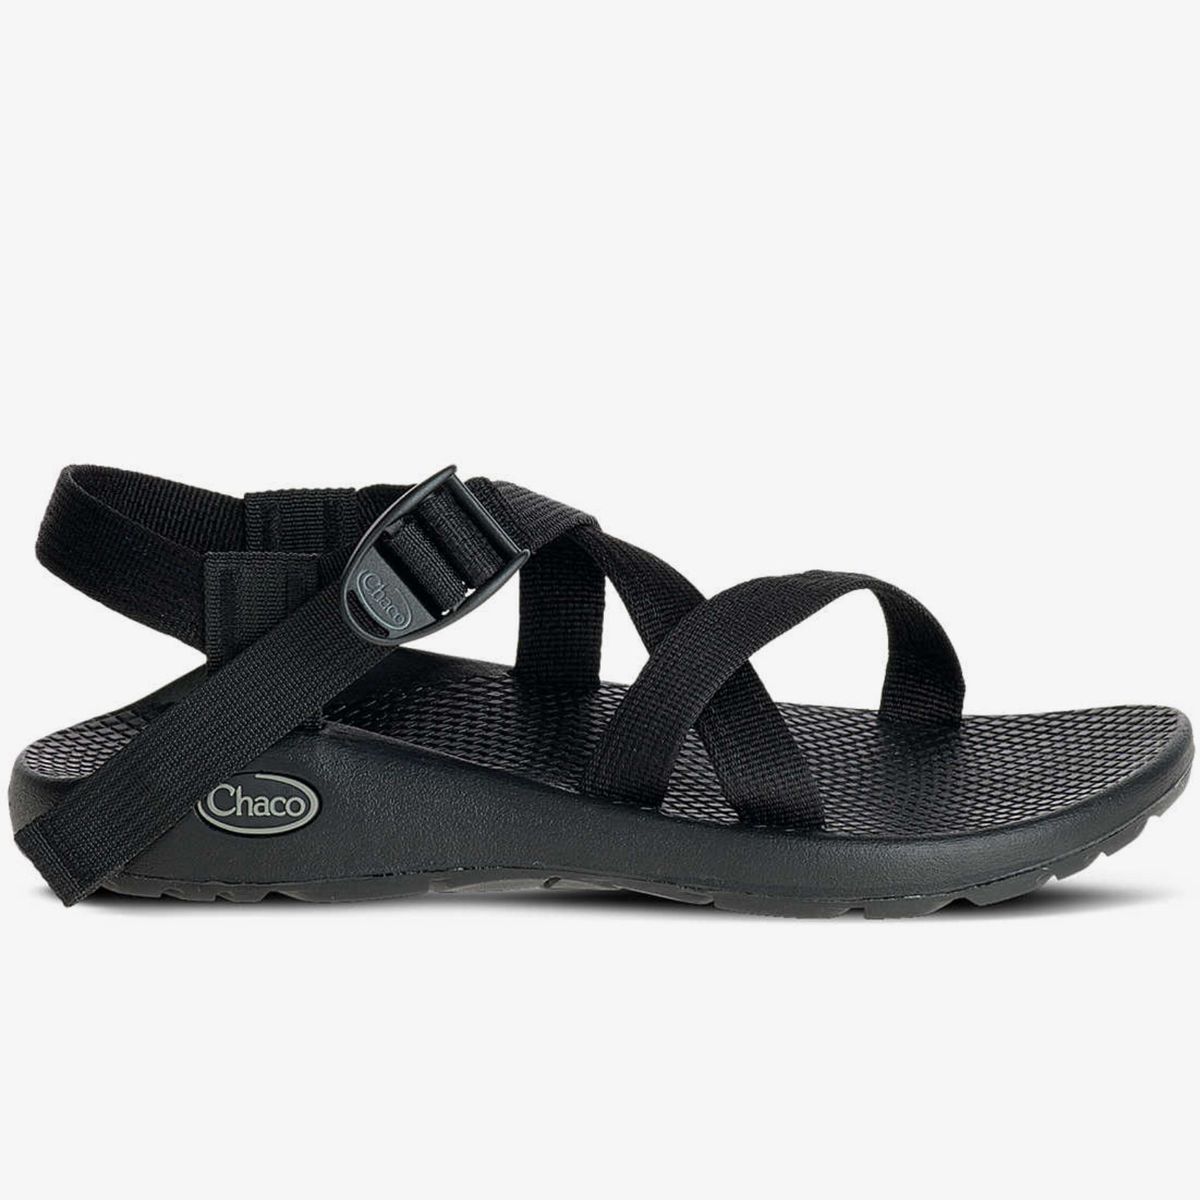 Chaco Z/1 ADJUSTABLE STRAP CLASSIC SANDAL